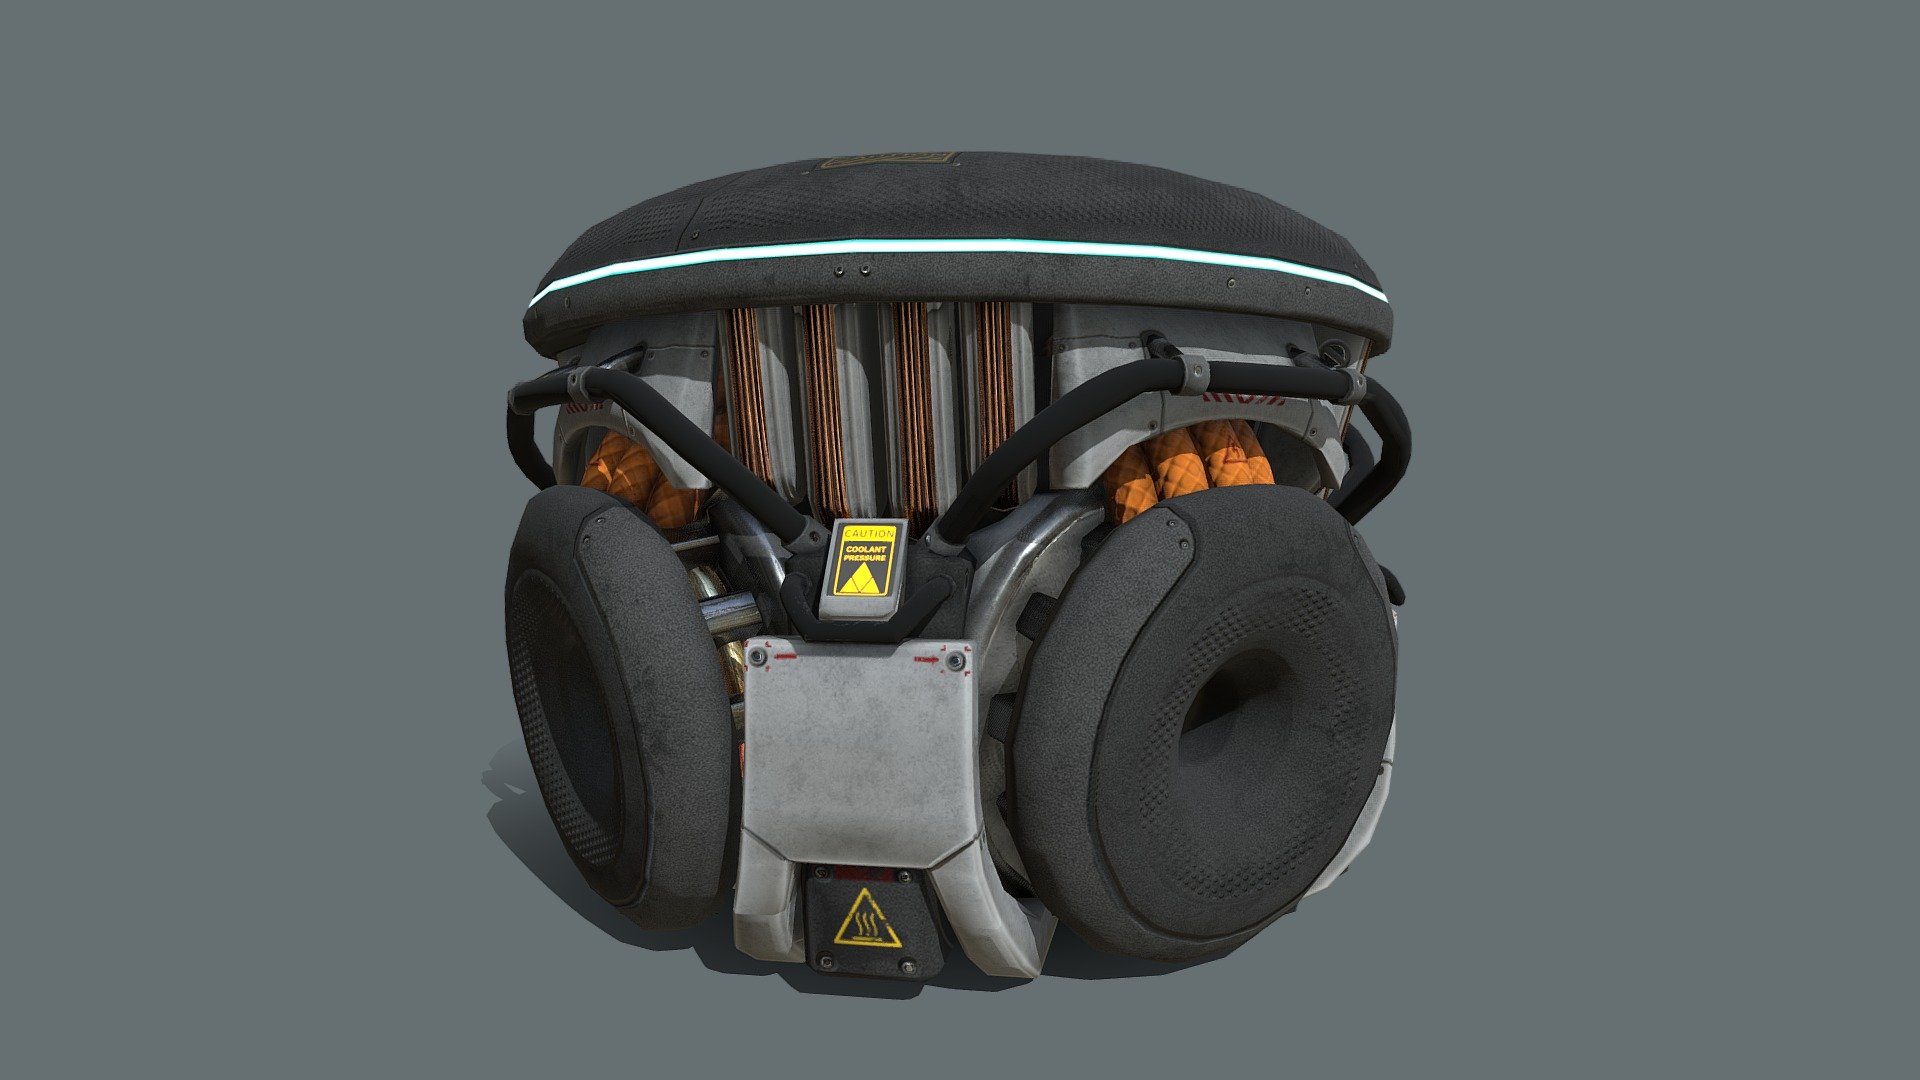 Could be a power, shield or gravity generator.  Or some space-ship's boombox!  Loud!

Game ready, stands at around 2m tall 3d model